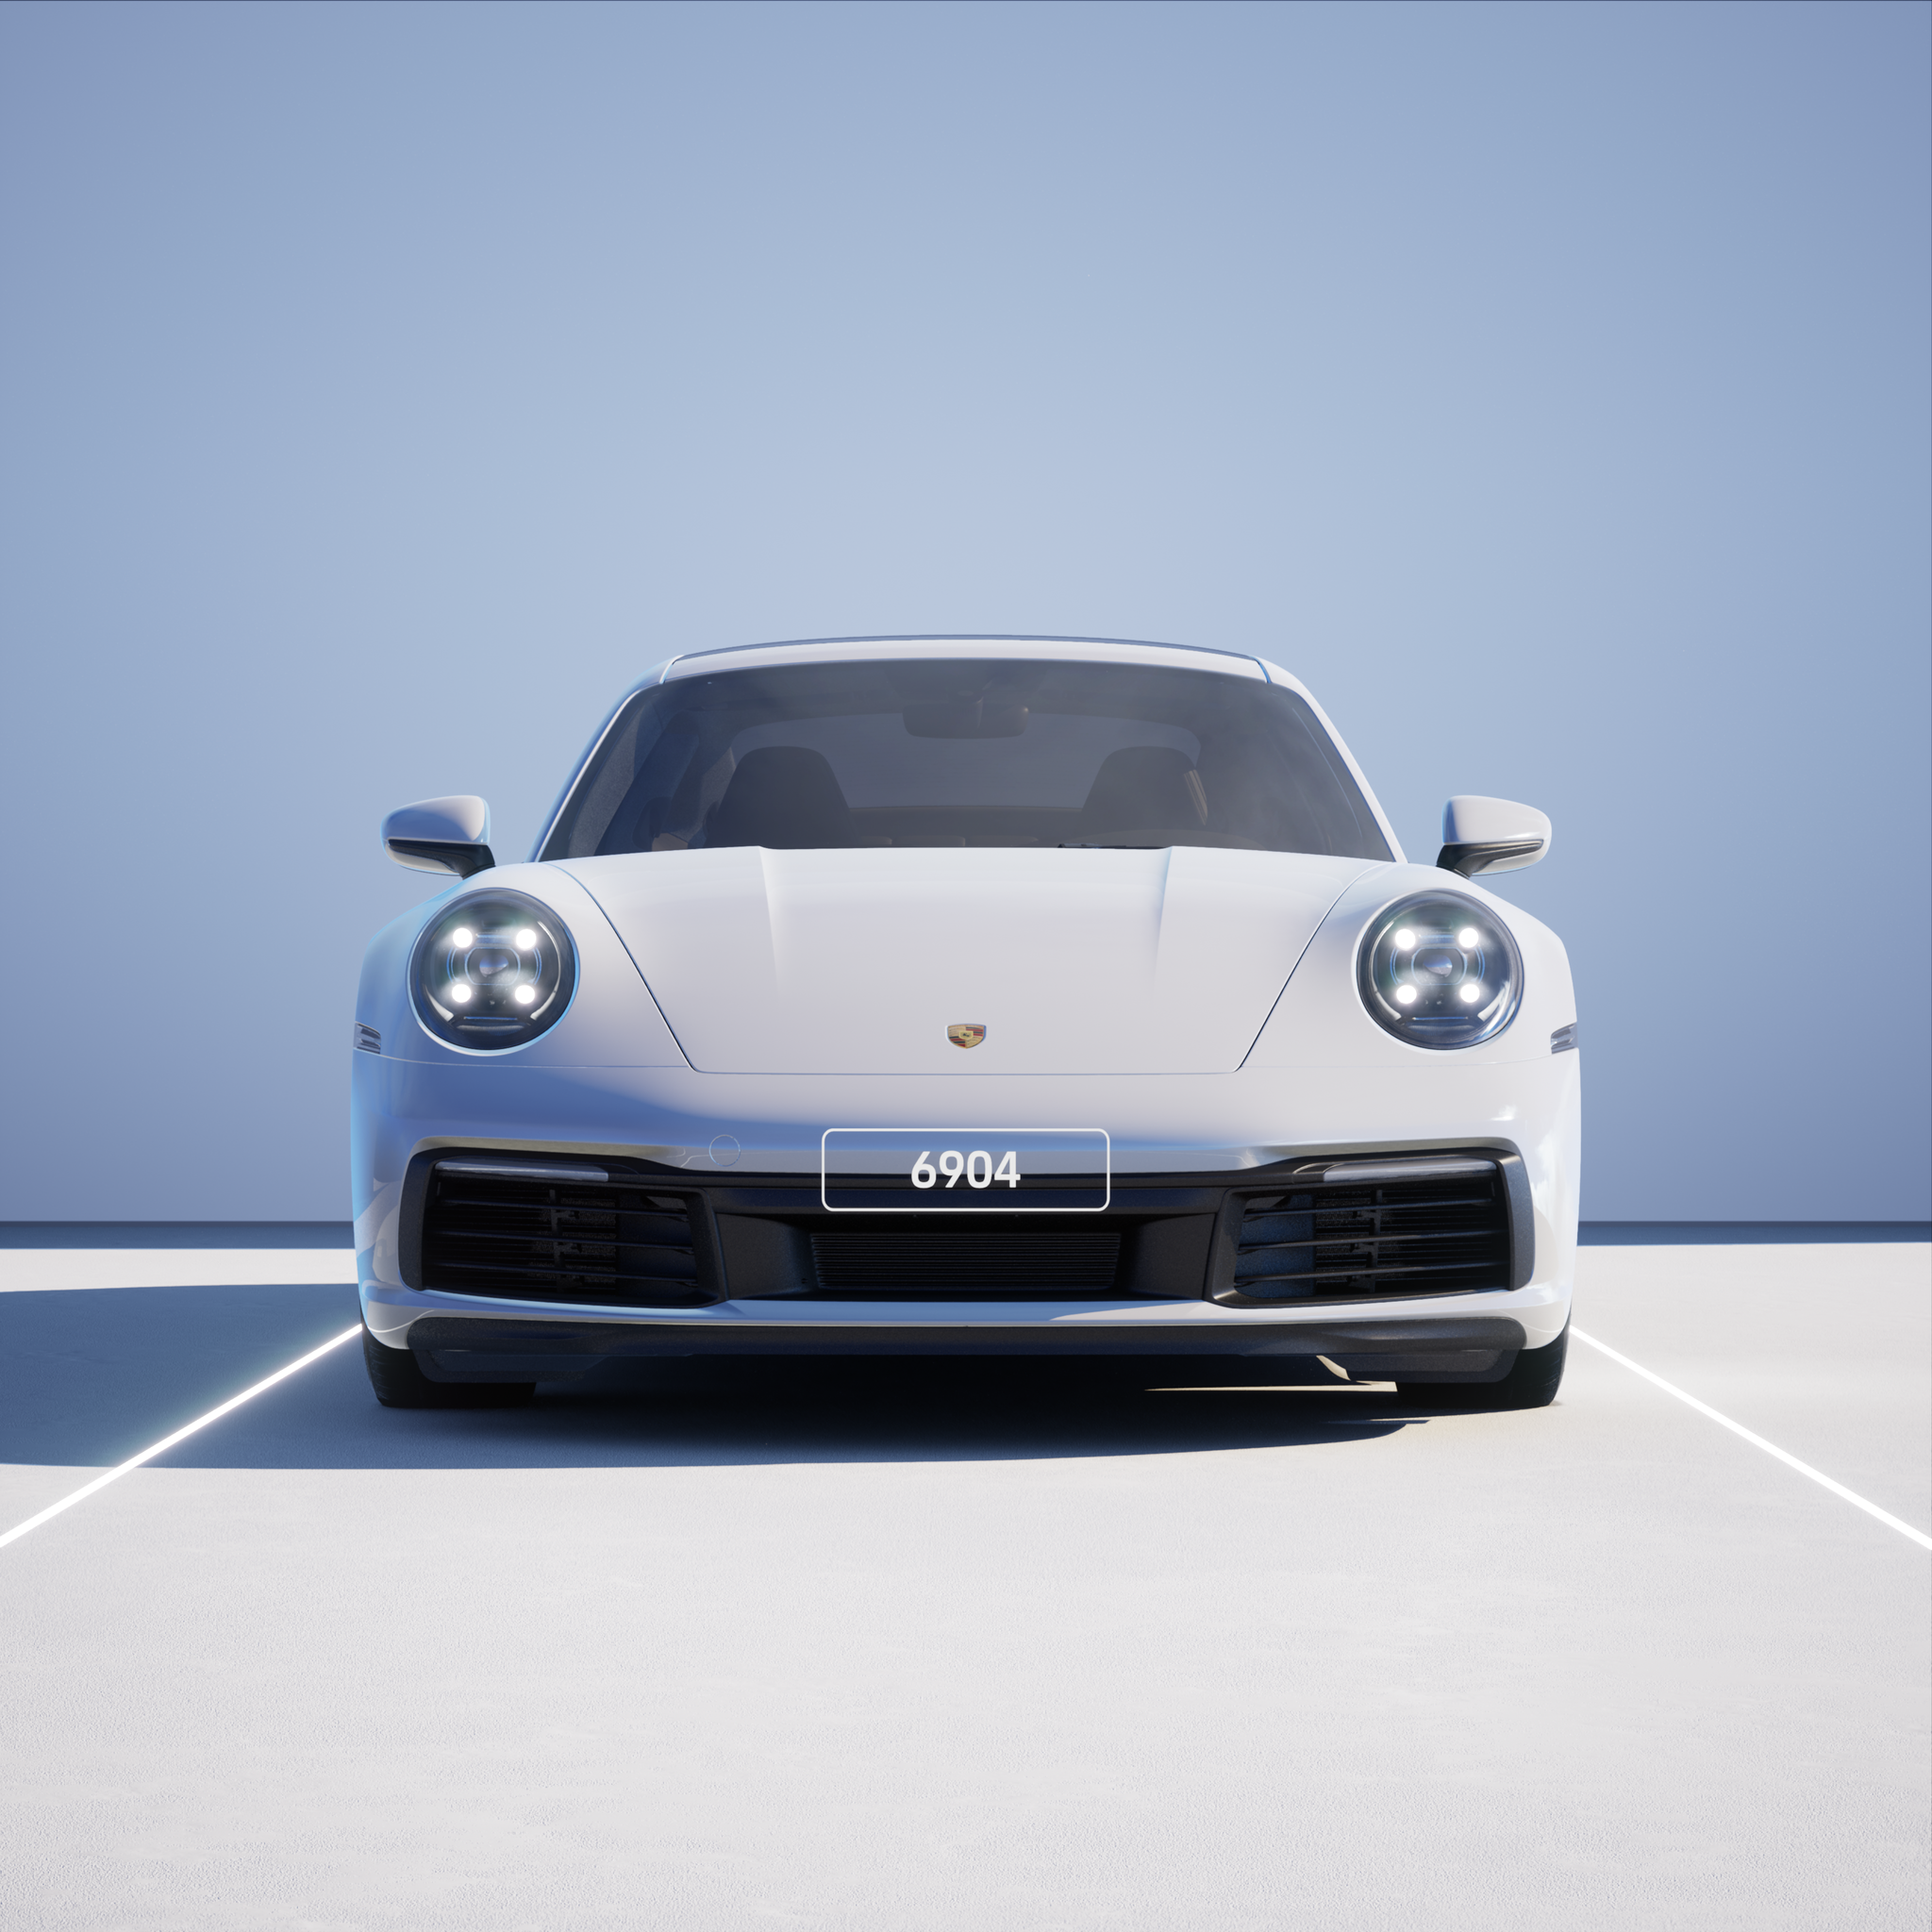 The PORSCHΞ 911 6904 image in phase